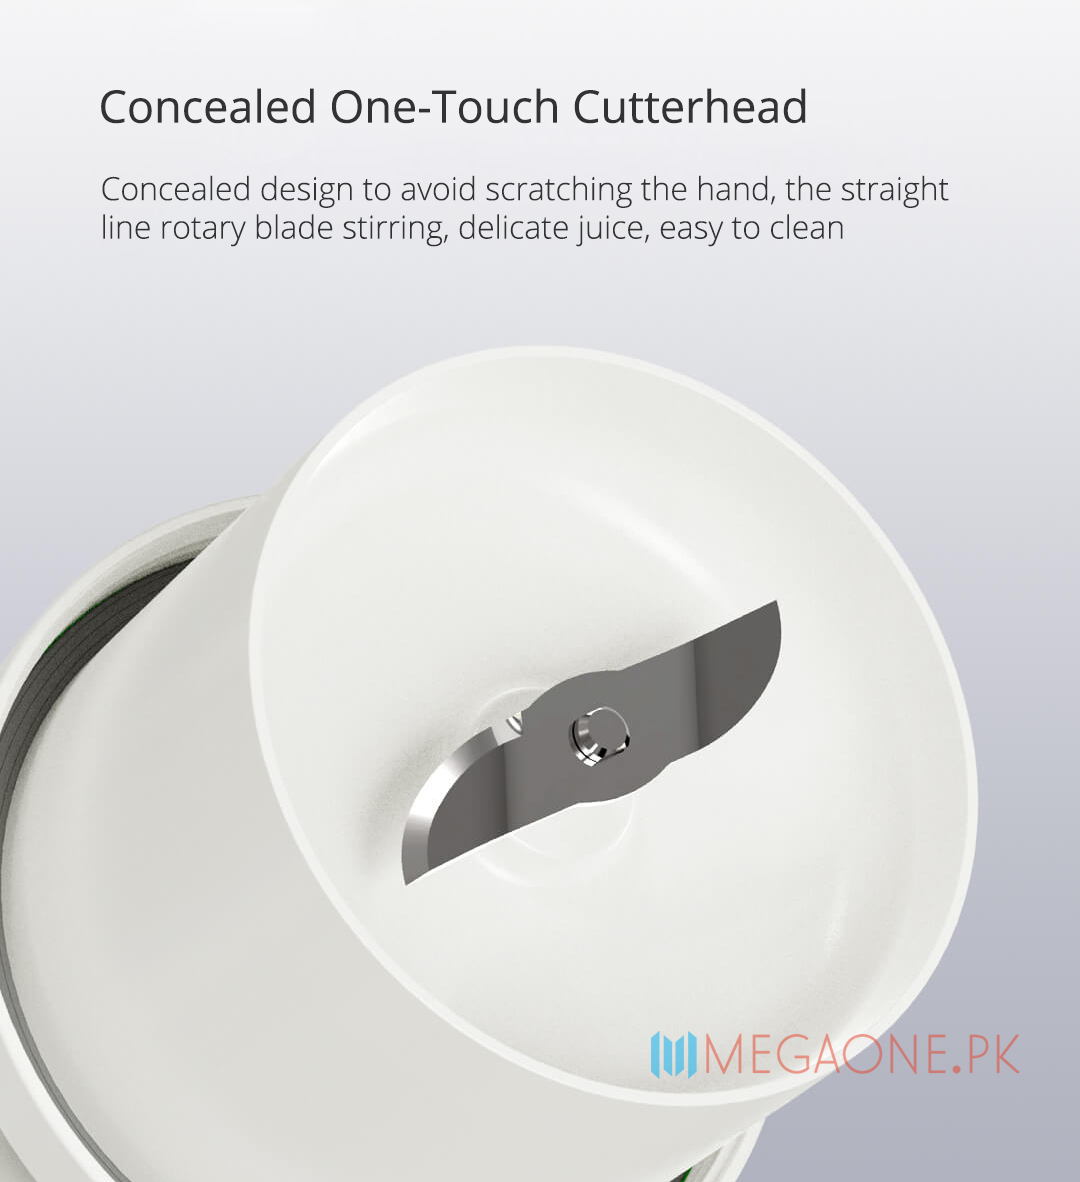 Concealed One-Touch Cutterhead Concealed design to avoid scratching the hand, the straight line rotary blade stirring, delicate juice, easy to clean